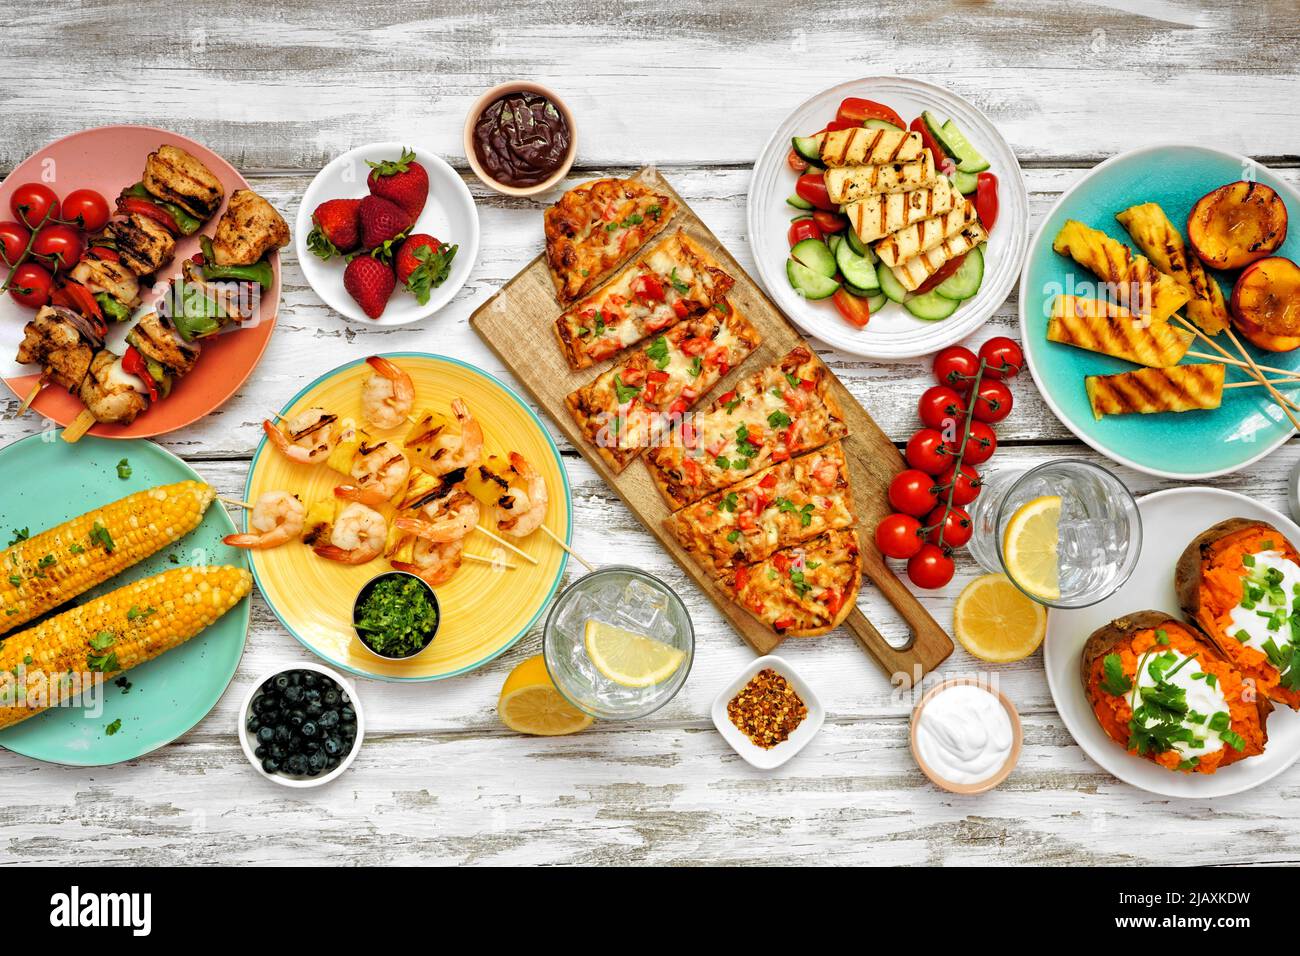 Summer BBQ grill table scene over a white wood background. Chicken and shrimp skewers, flatbread, stuffed sweet potato, grilled fruit, corn and salad. Stock Photo